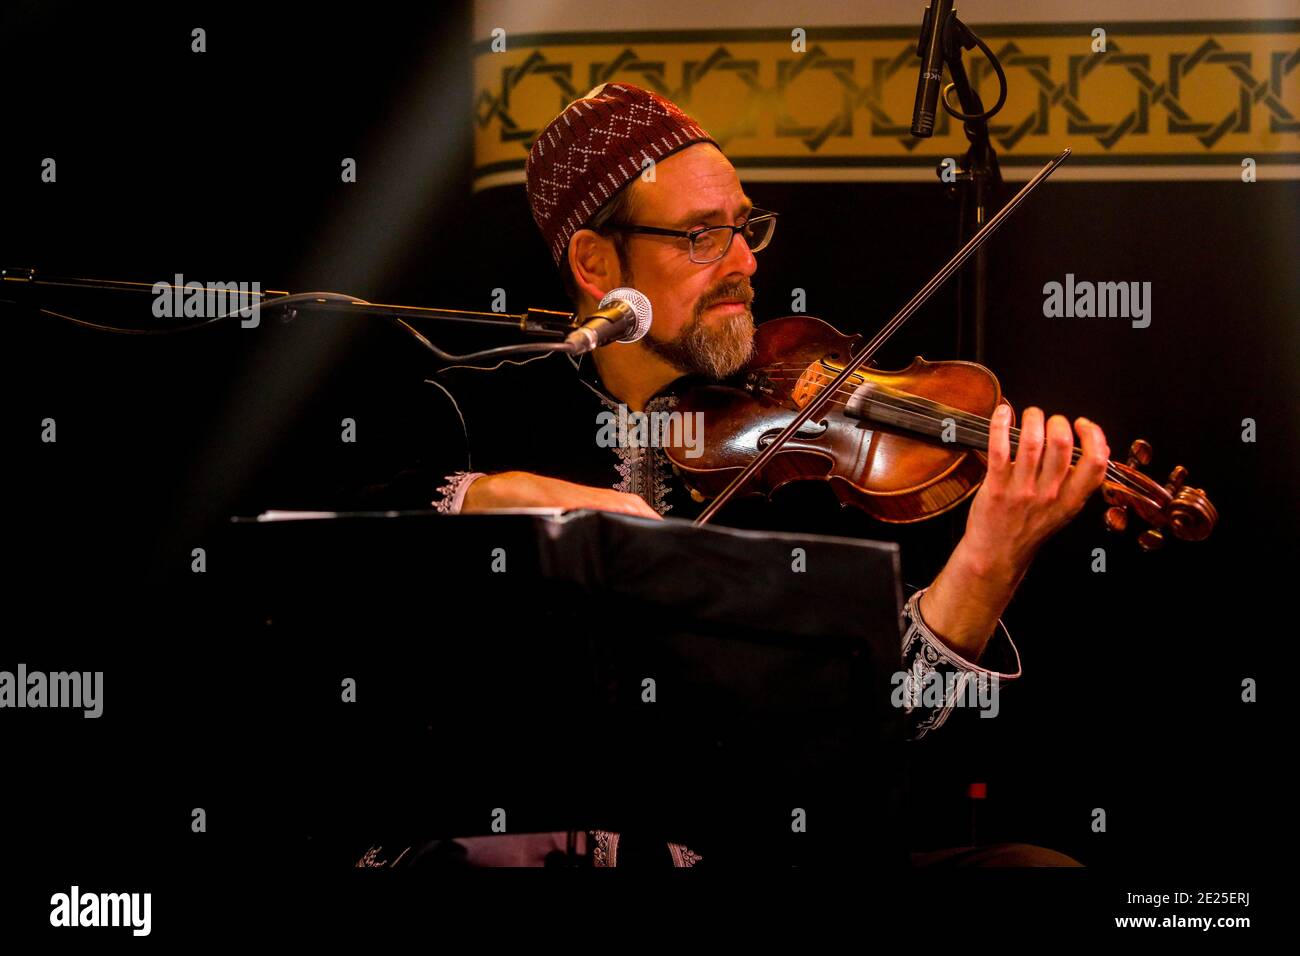 Al Firdaus sufi band performing at the Apollo Theatre to celebrate the Mawlid muslim festival, Paris, France. Stock Photo